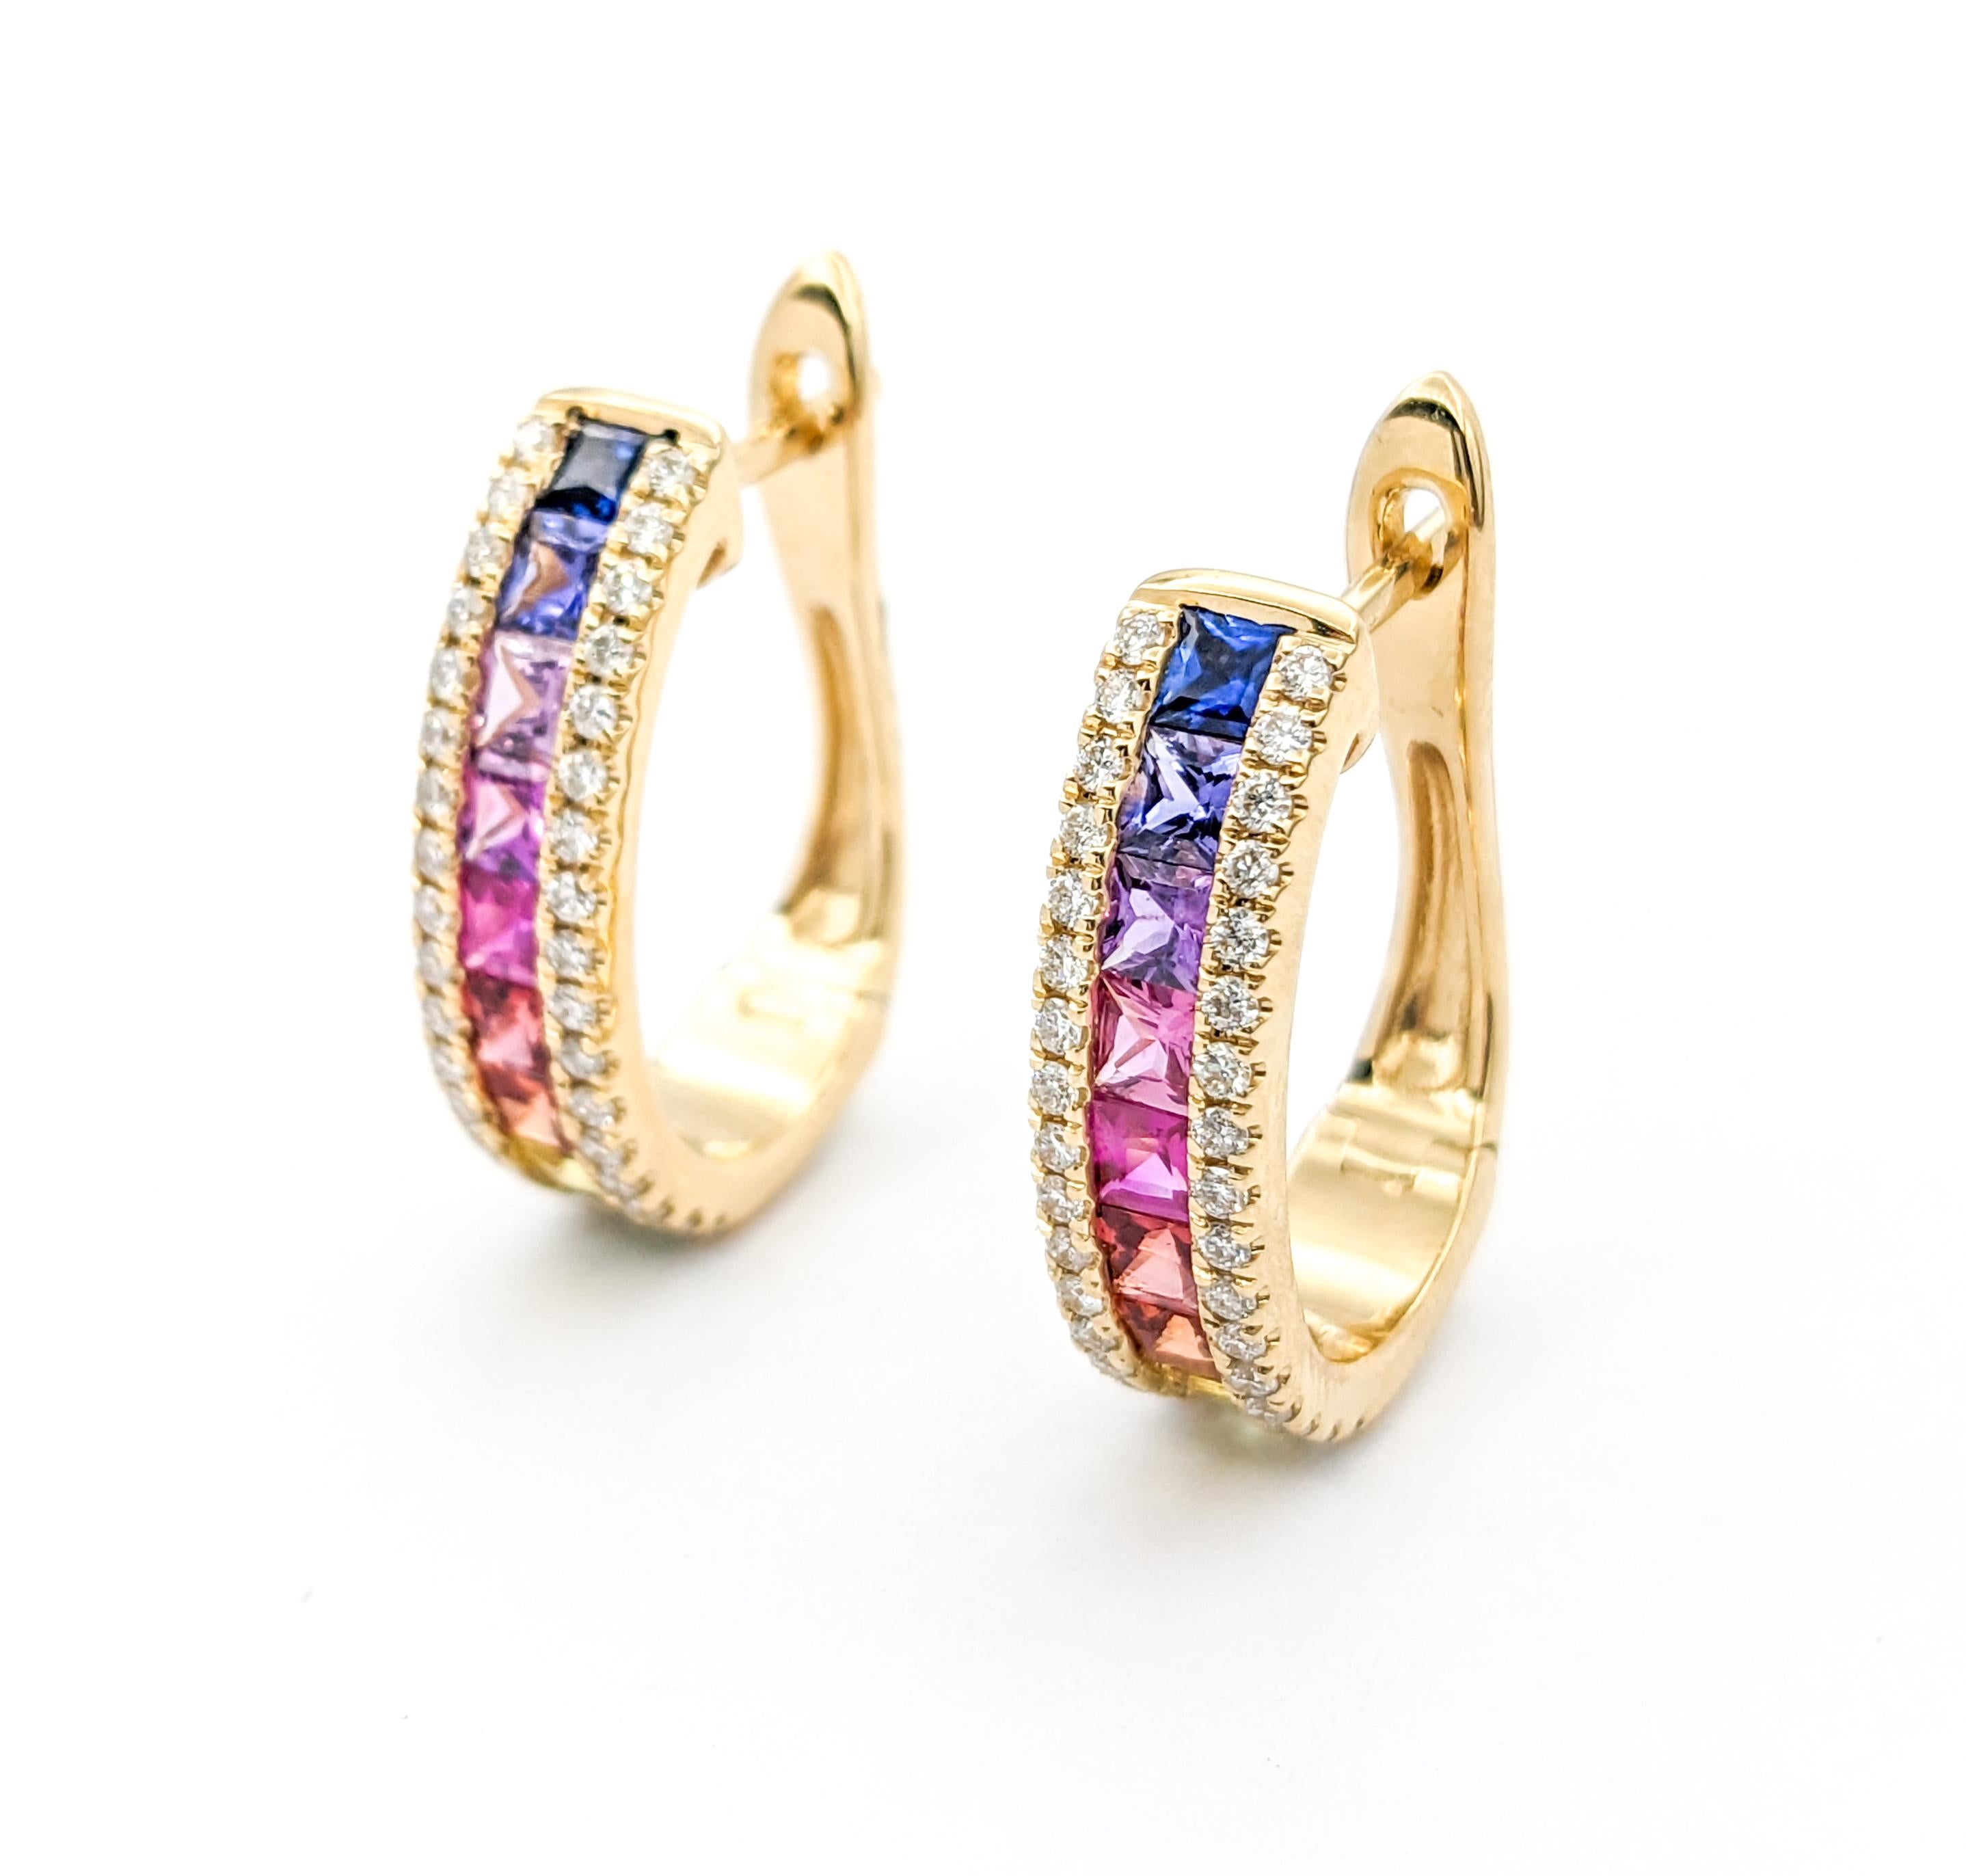 1.85ctw Multi-Color Sapphires & Diamond LeverBack Hoop Earrings In Yellow Gold

Introducing these beautiful gemstone fashion earrings crafted in 14k yellow gold, featuring .45ctw of diamonds with leverback and 1.85ctw of multi-color sapphires. The